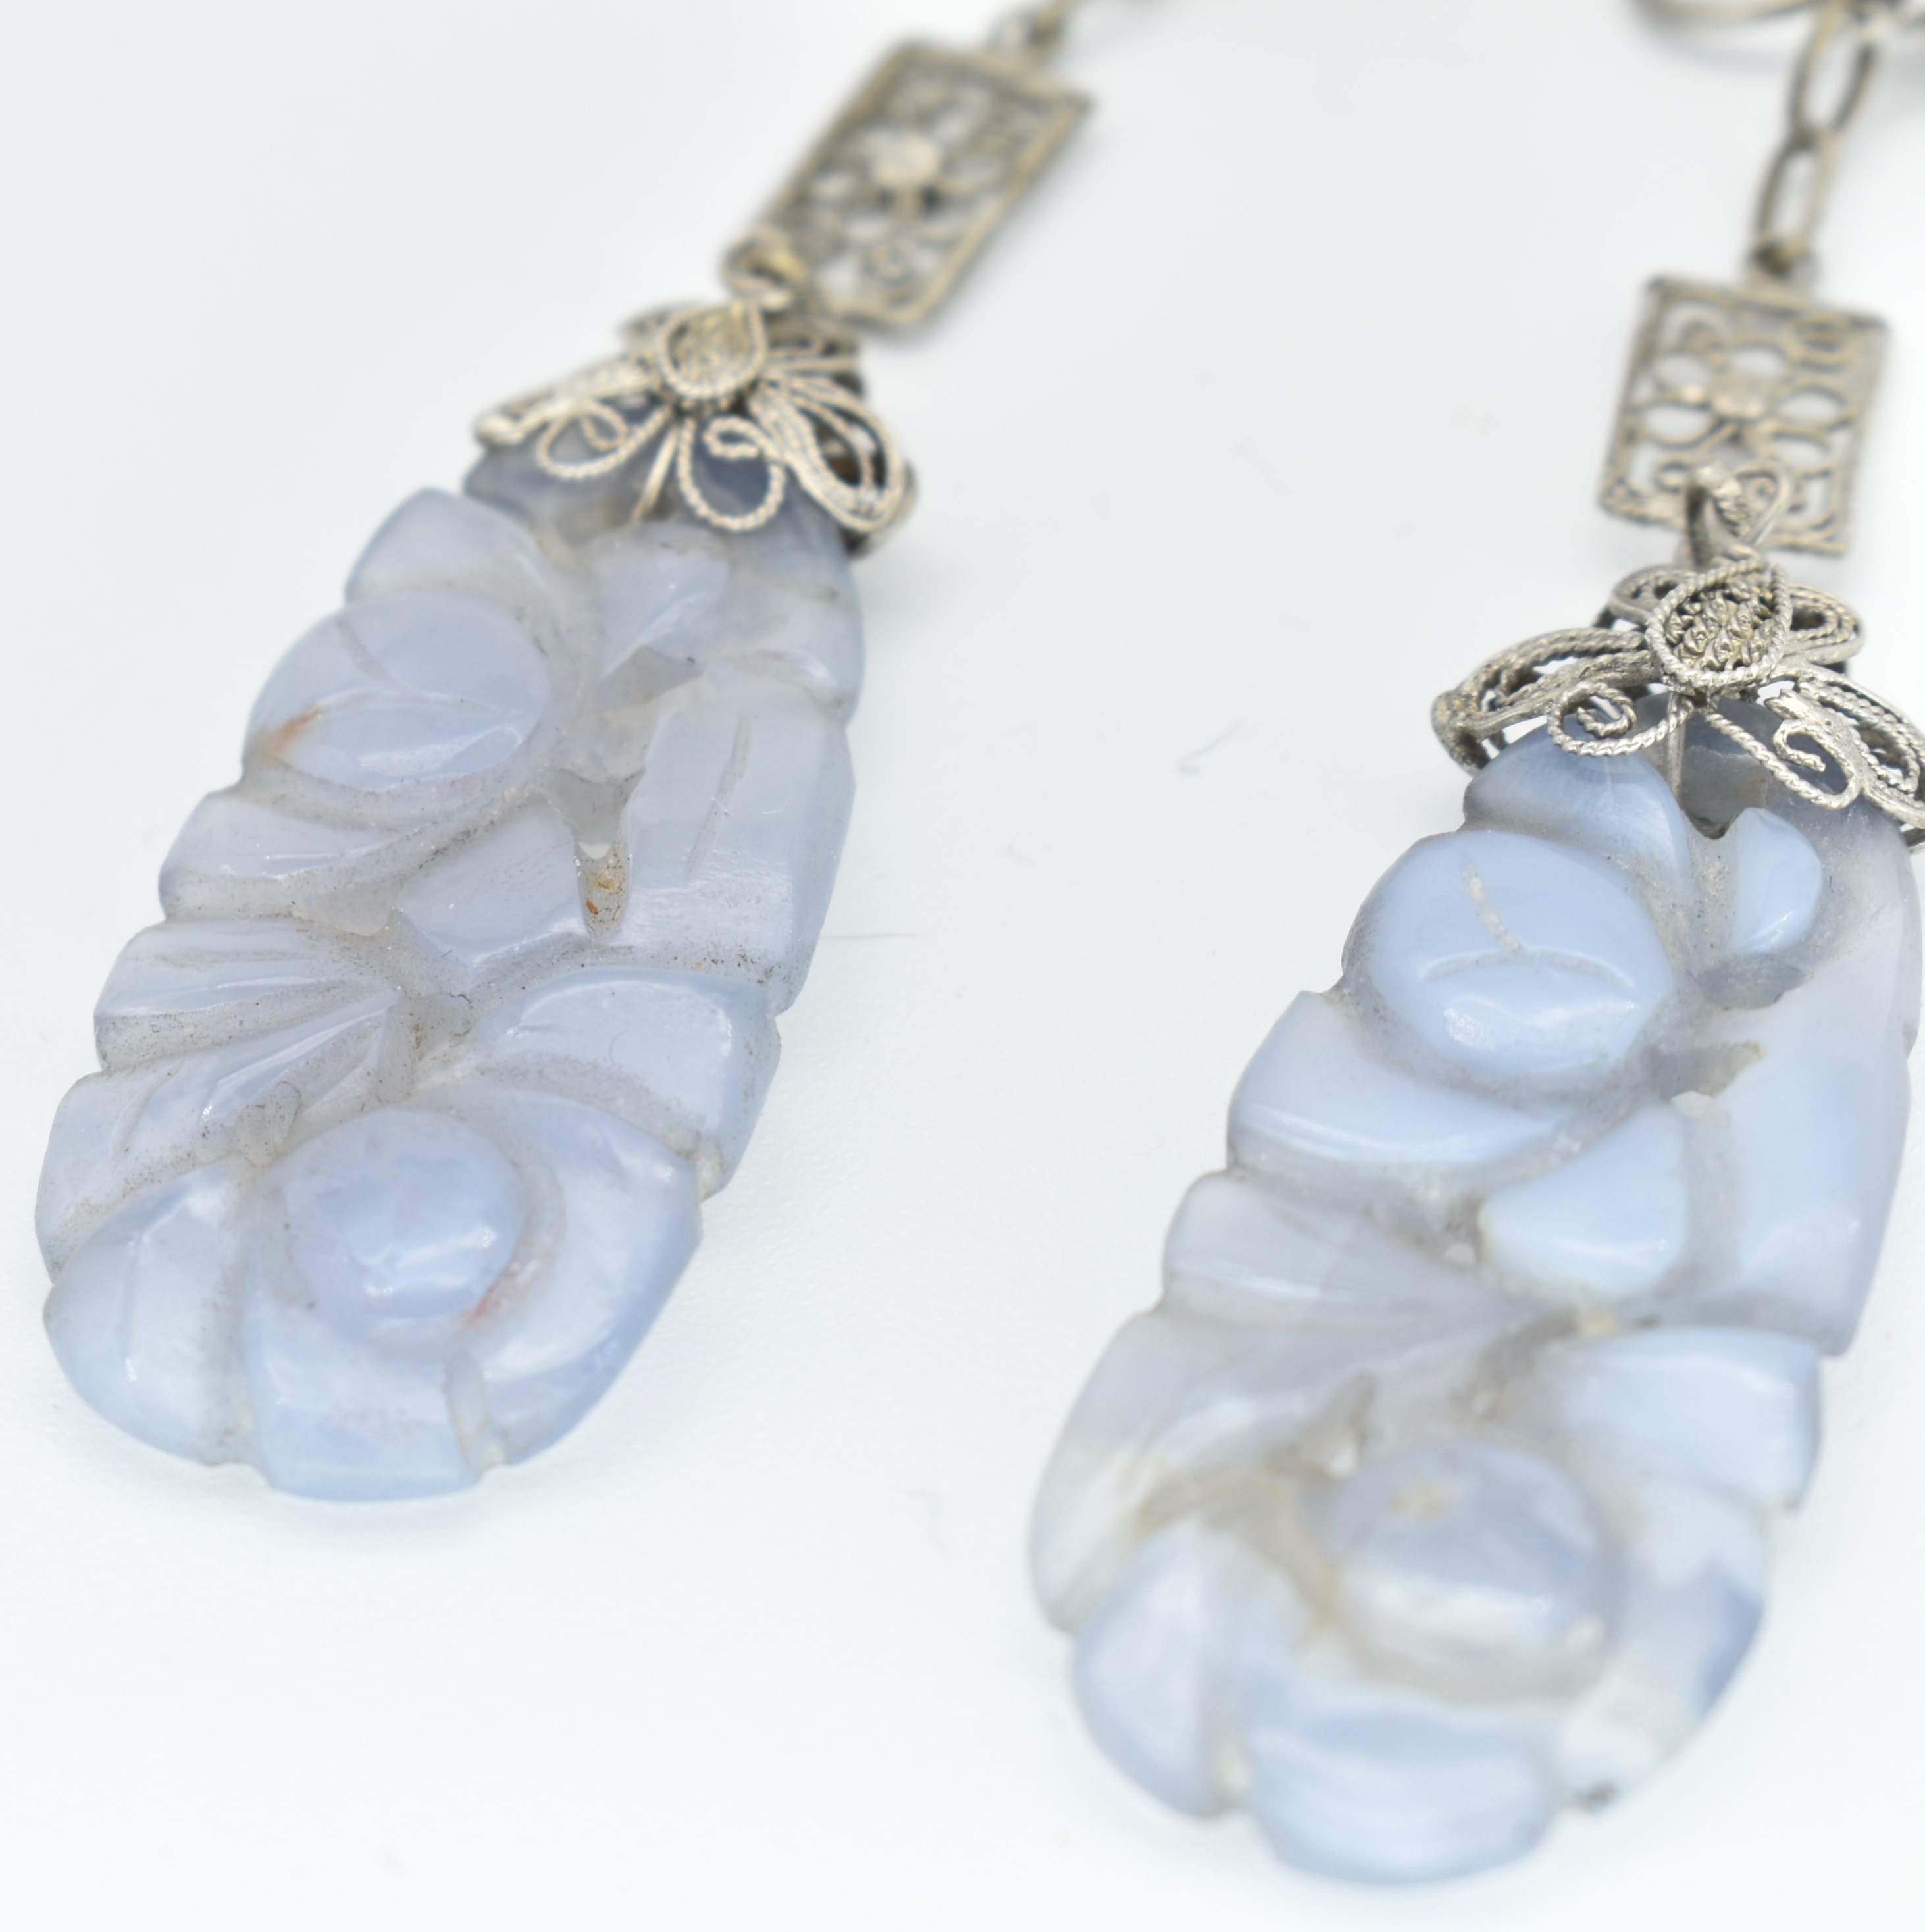 Pair of Chinese Carved Agate Pendant Earrings - Image 3 of 4